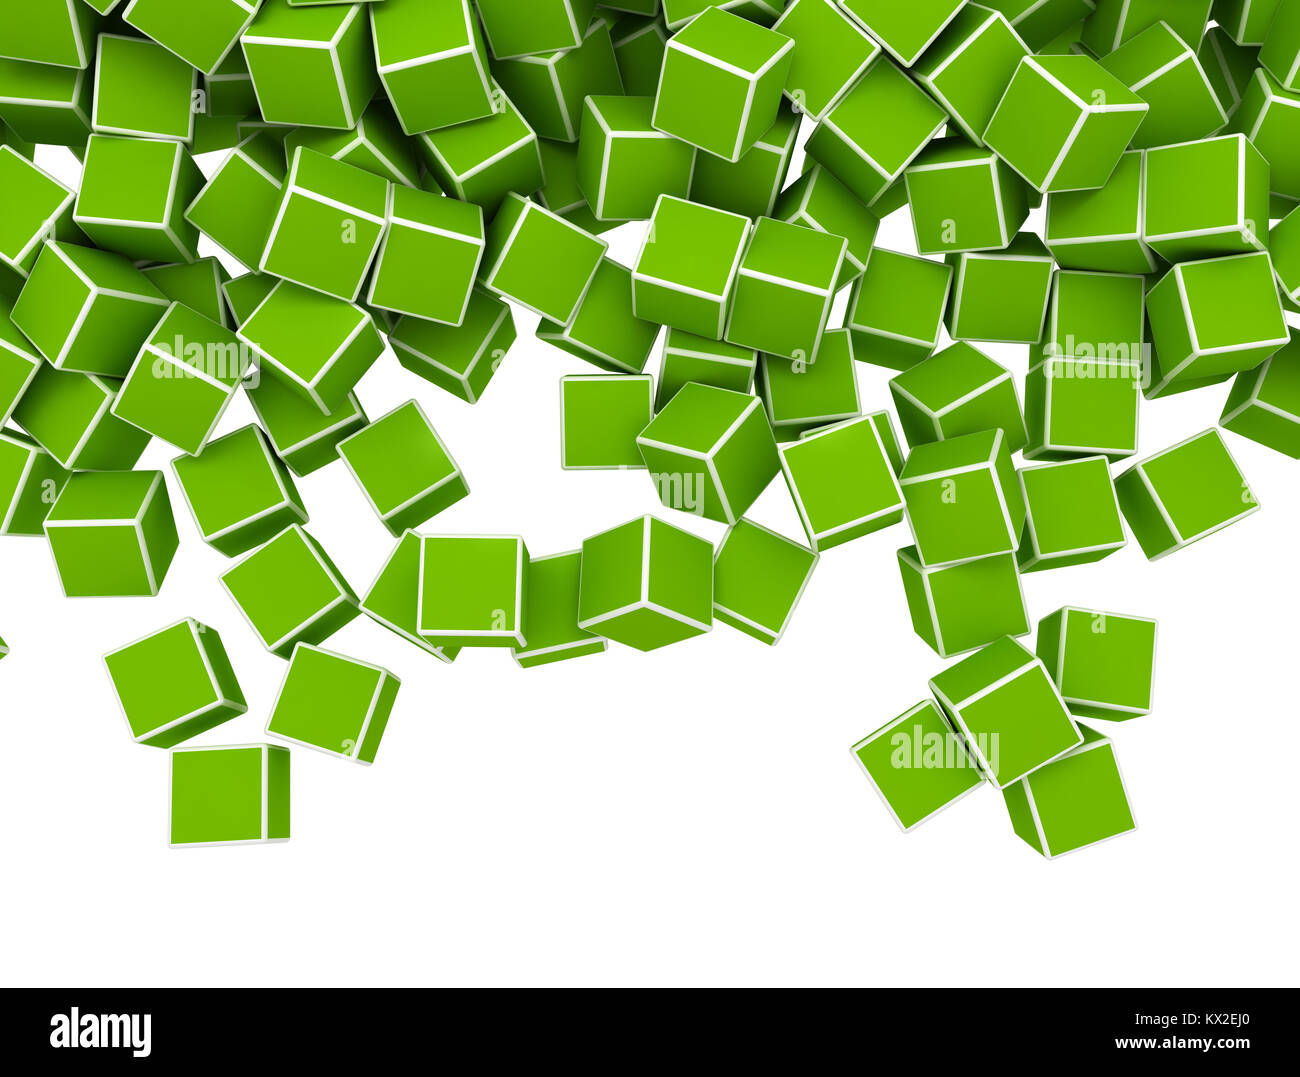 Falling green boxes isolated on white background Stock Photo